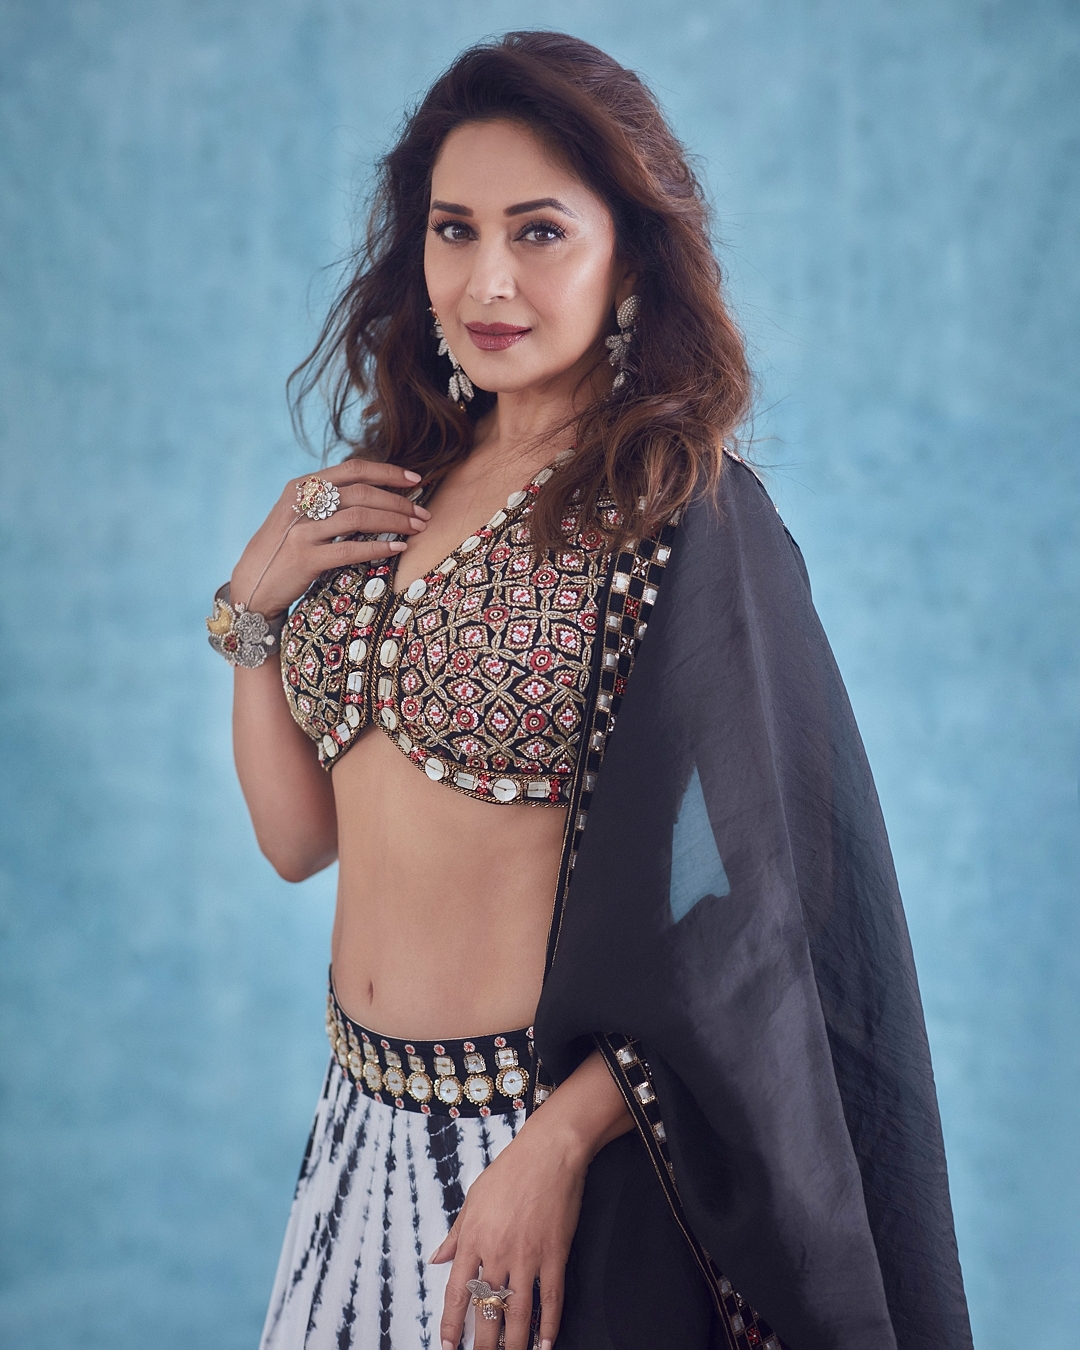  Madhuri Dixit Nene flaunts her toned abs in the lehenga. Check out the diva slaying ethnic fashion like a pro. (Image: Instagram)